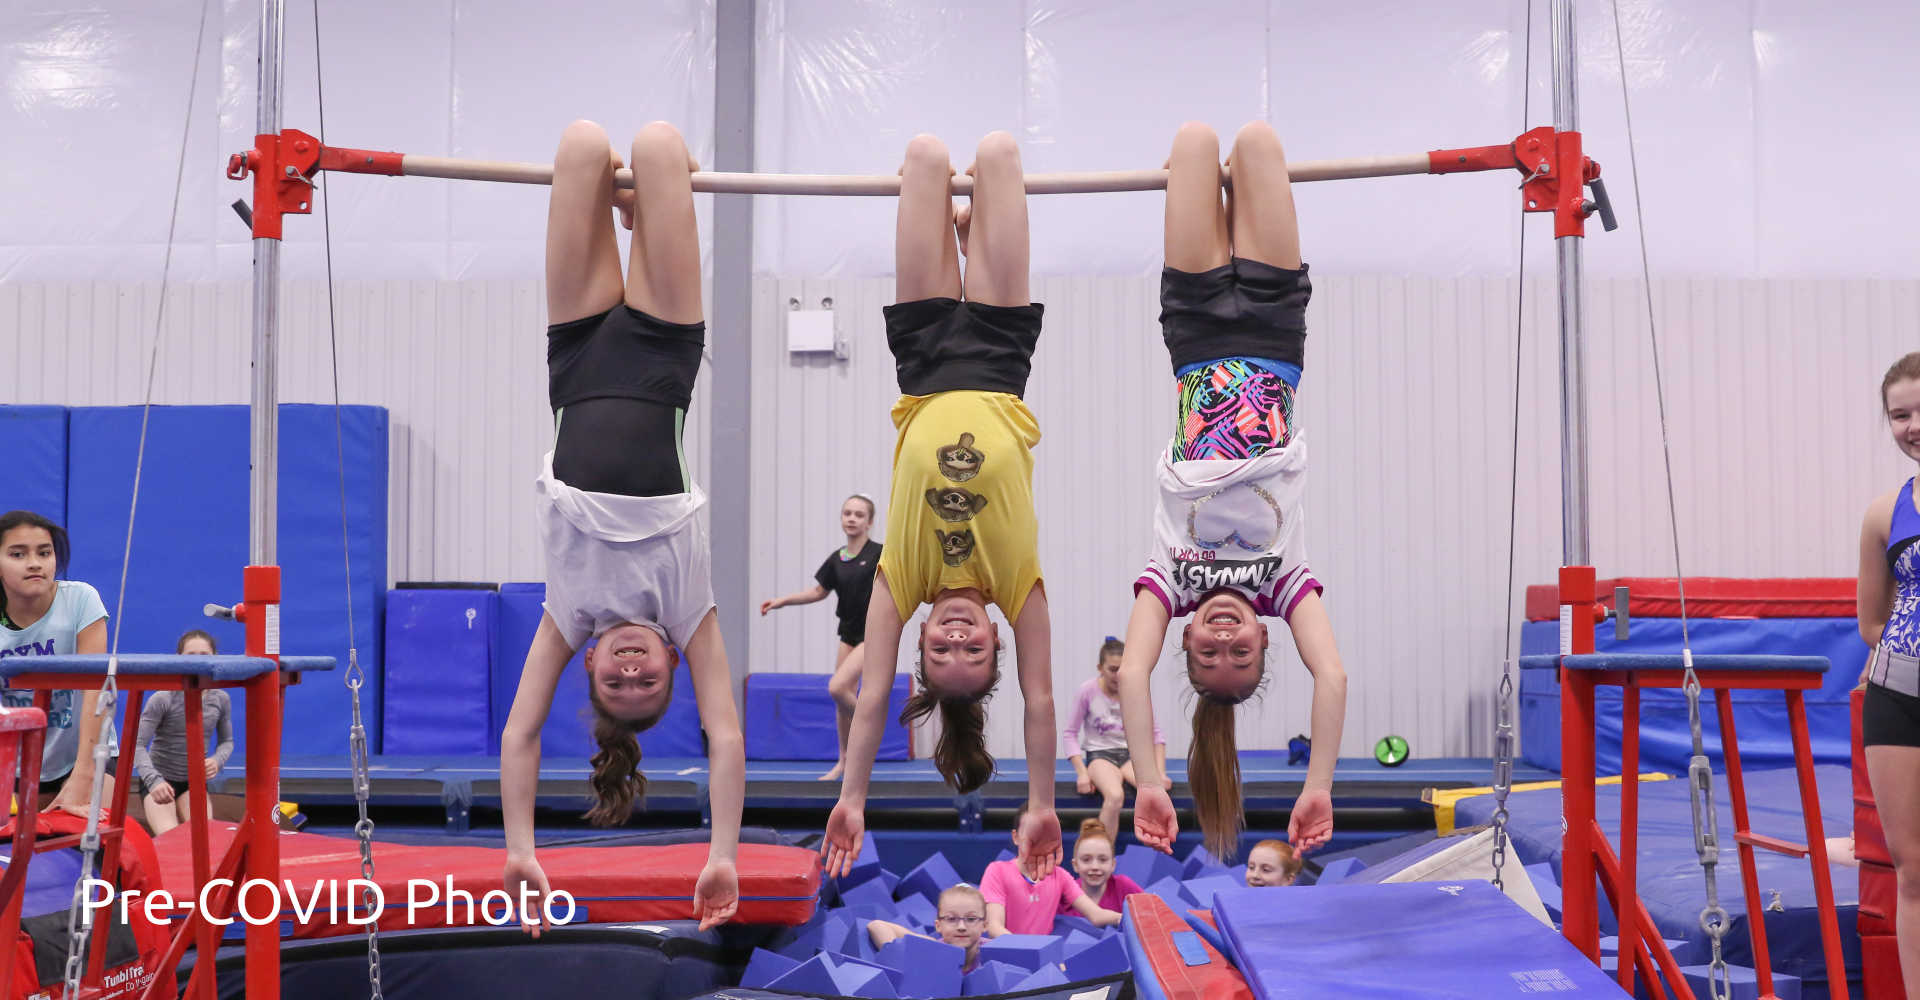 Gymnastics PD Camps at Gymworld - Smiling girls hanging upside down on the bars at the Gymworld in London.